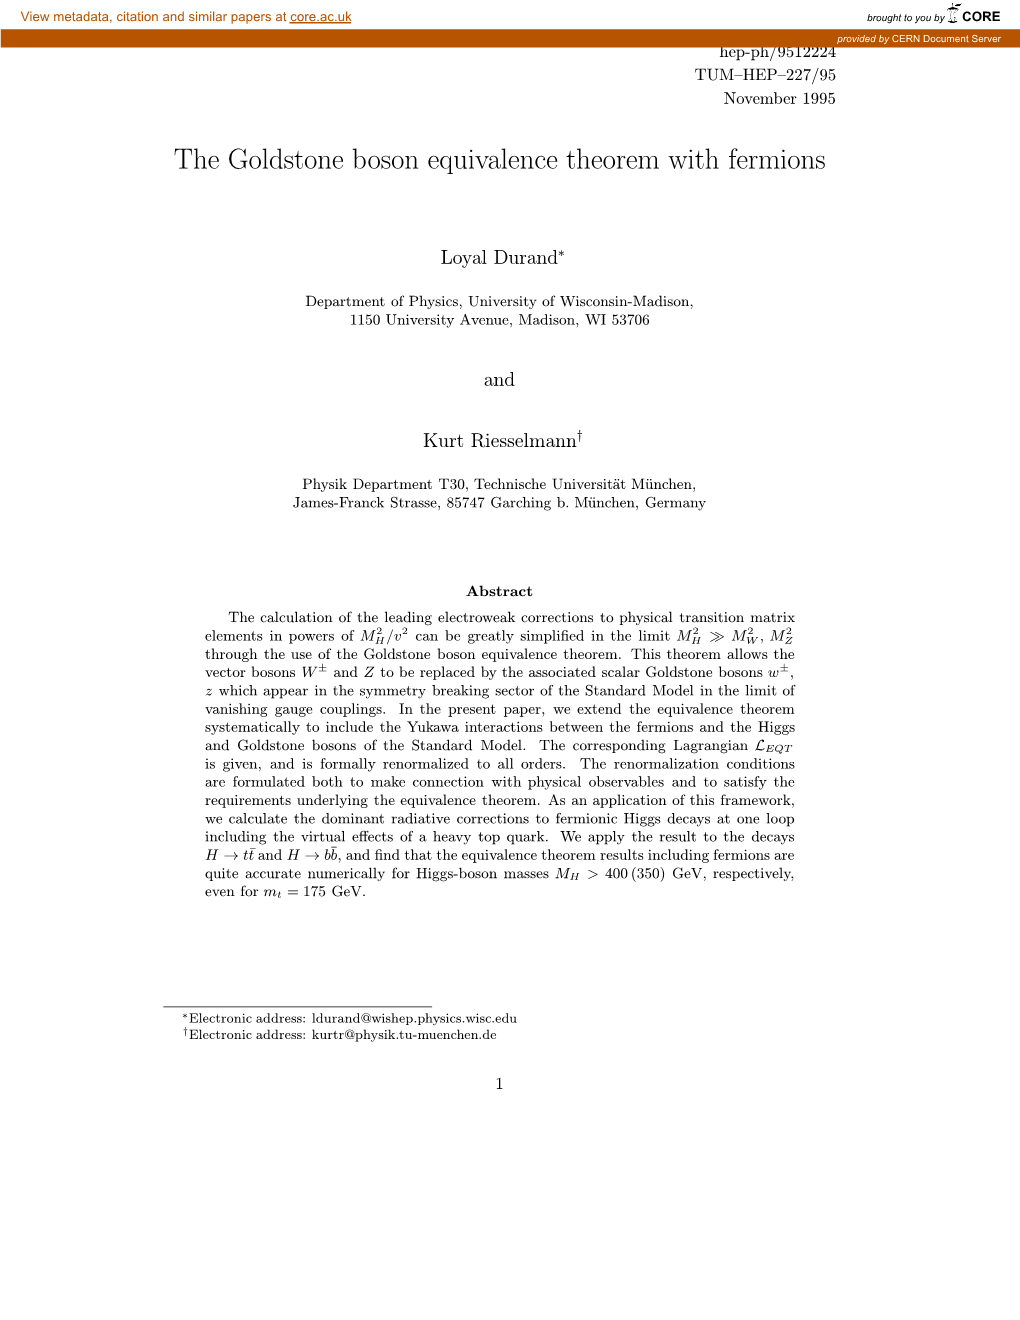 The Goldstone Boson Equivalence Theorem with Fermions